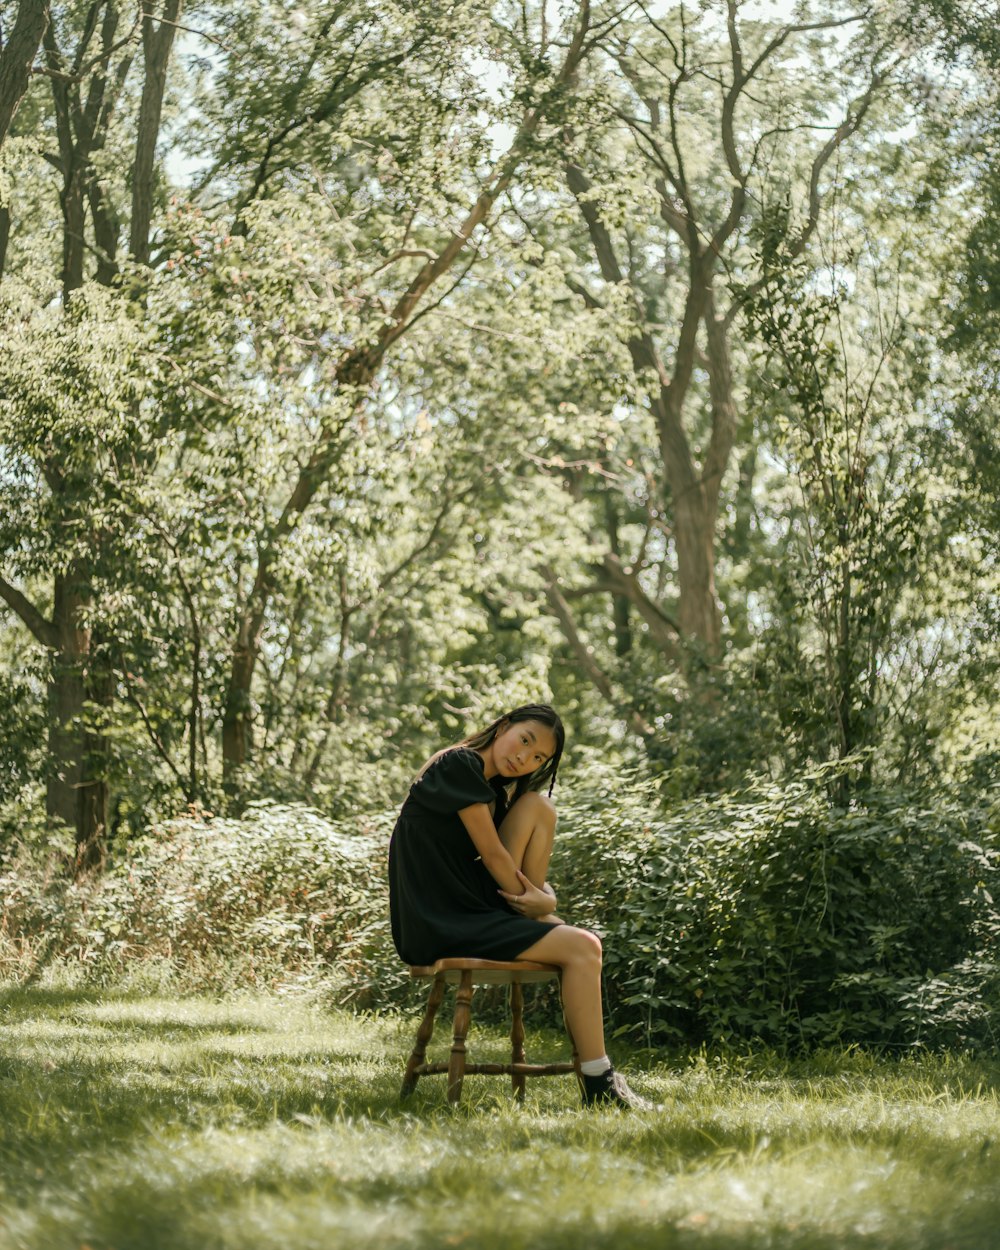 woman in black t-shirt sitting on brown wooden chair under green trees during daytime